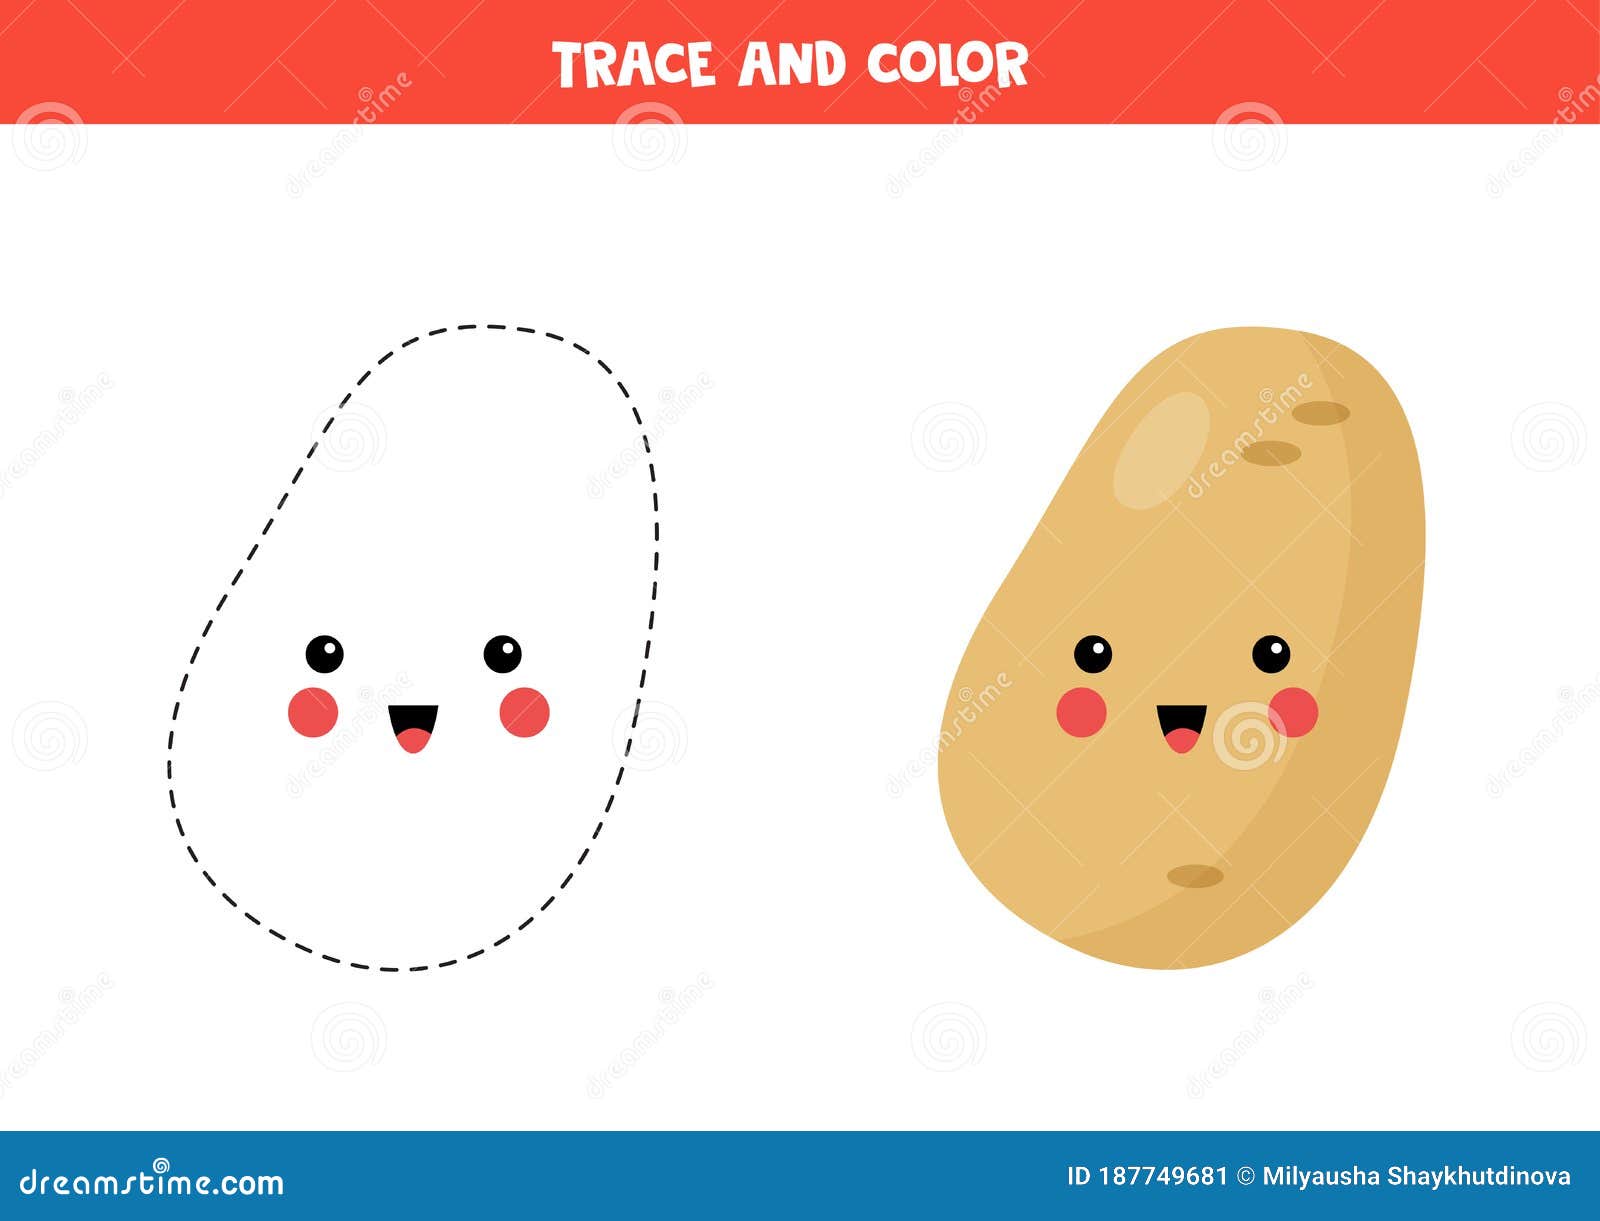 Potato kawaii is what a overview for